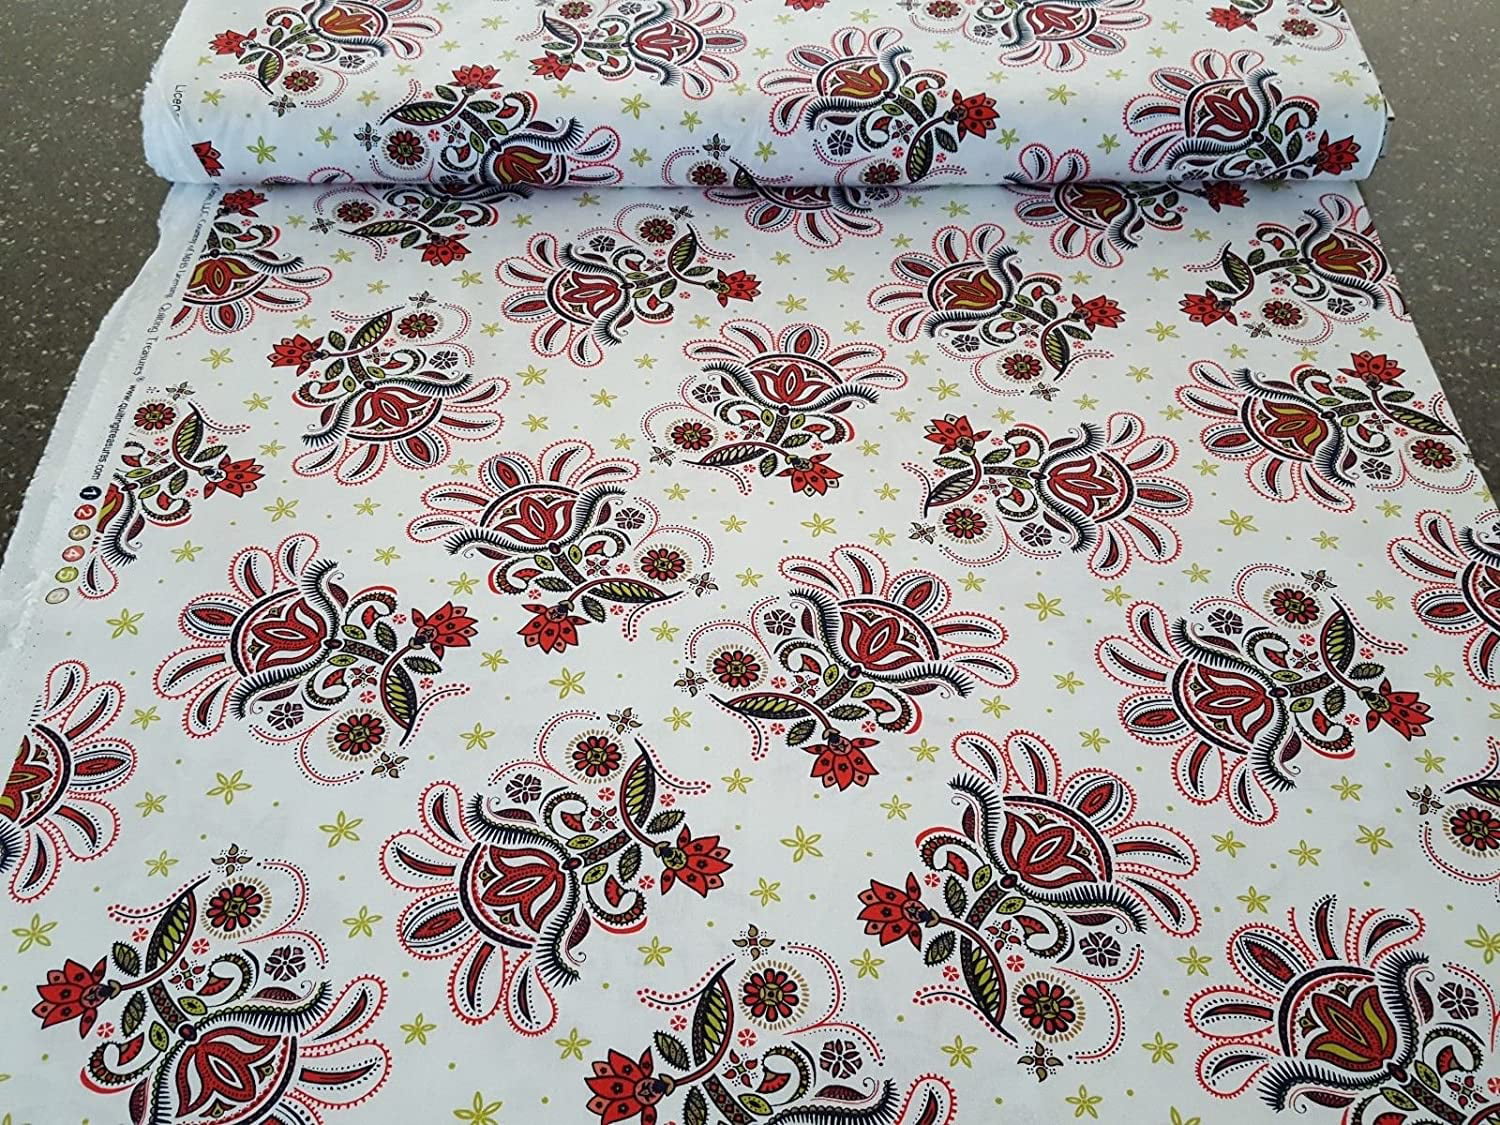 Quilting Treasures Ceylon Floral Paisley White 100% cotton fabric by the yard 